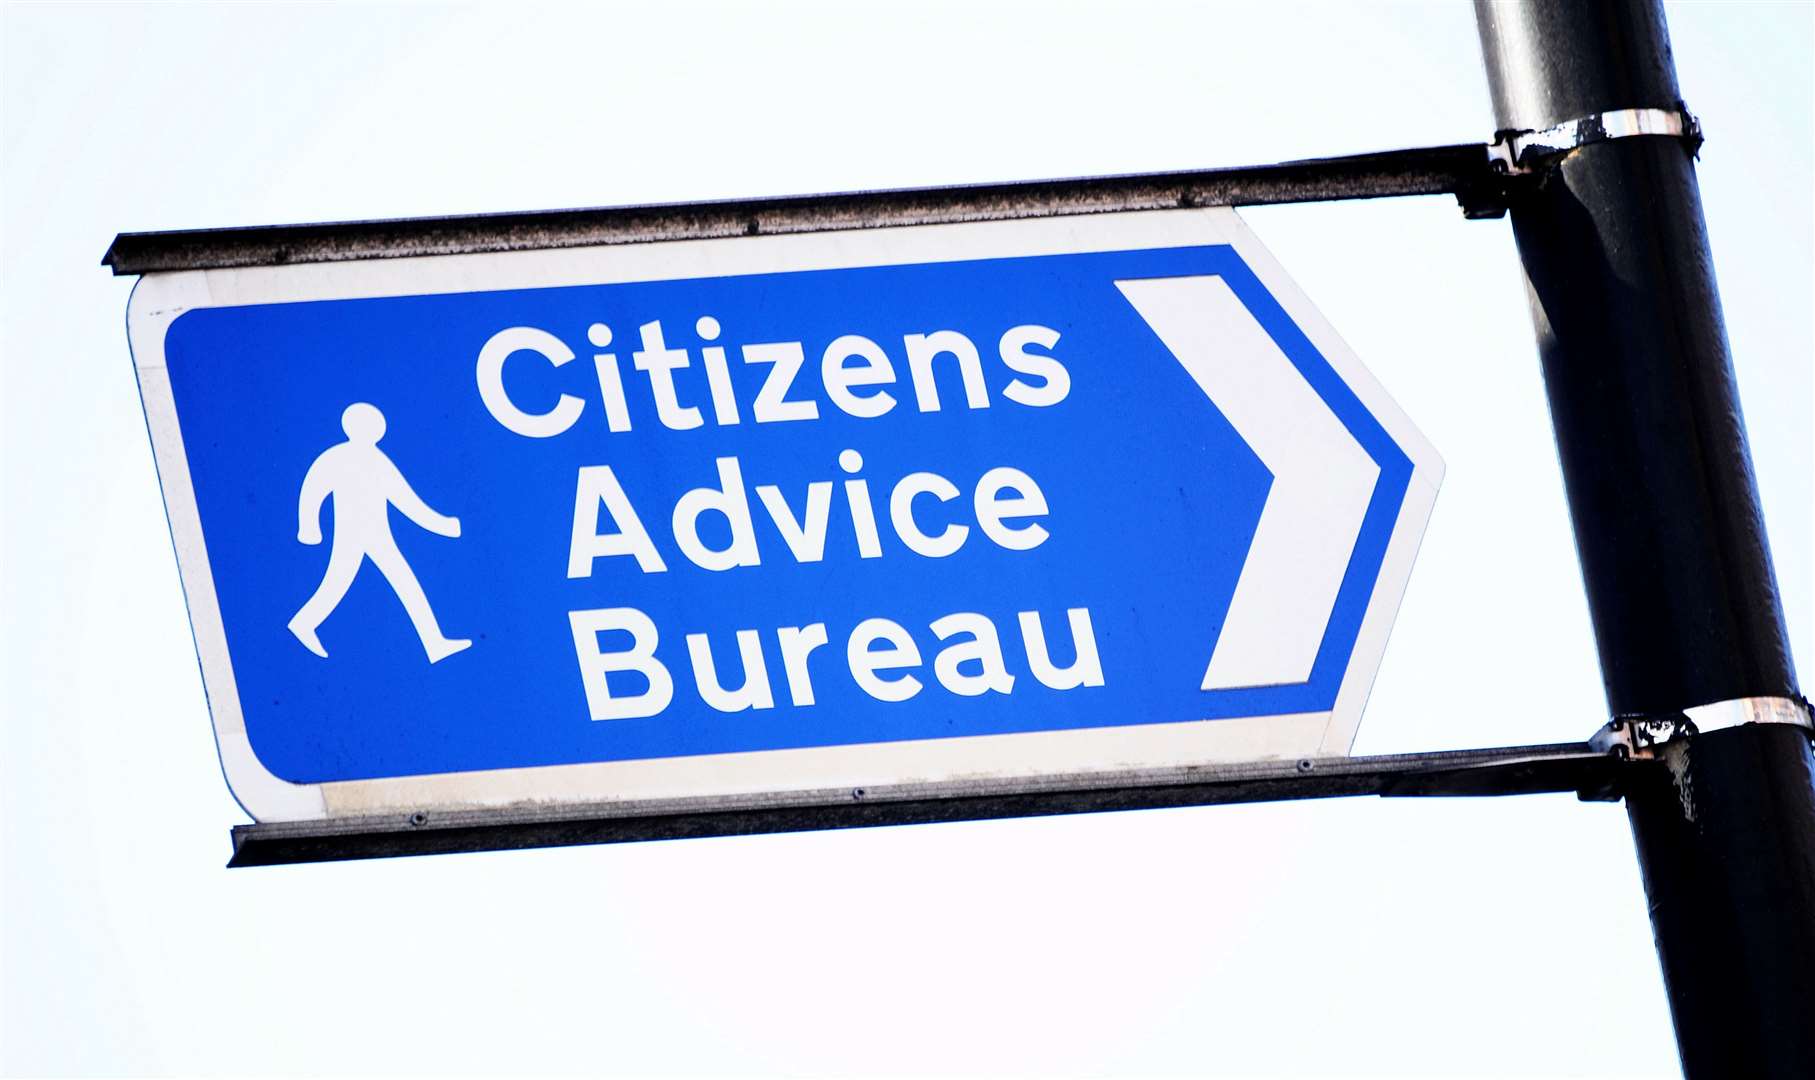 The life-changing impact of its network of Citizens Advice bureaux has been highlighted in a new report.